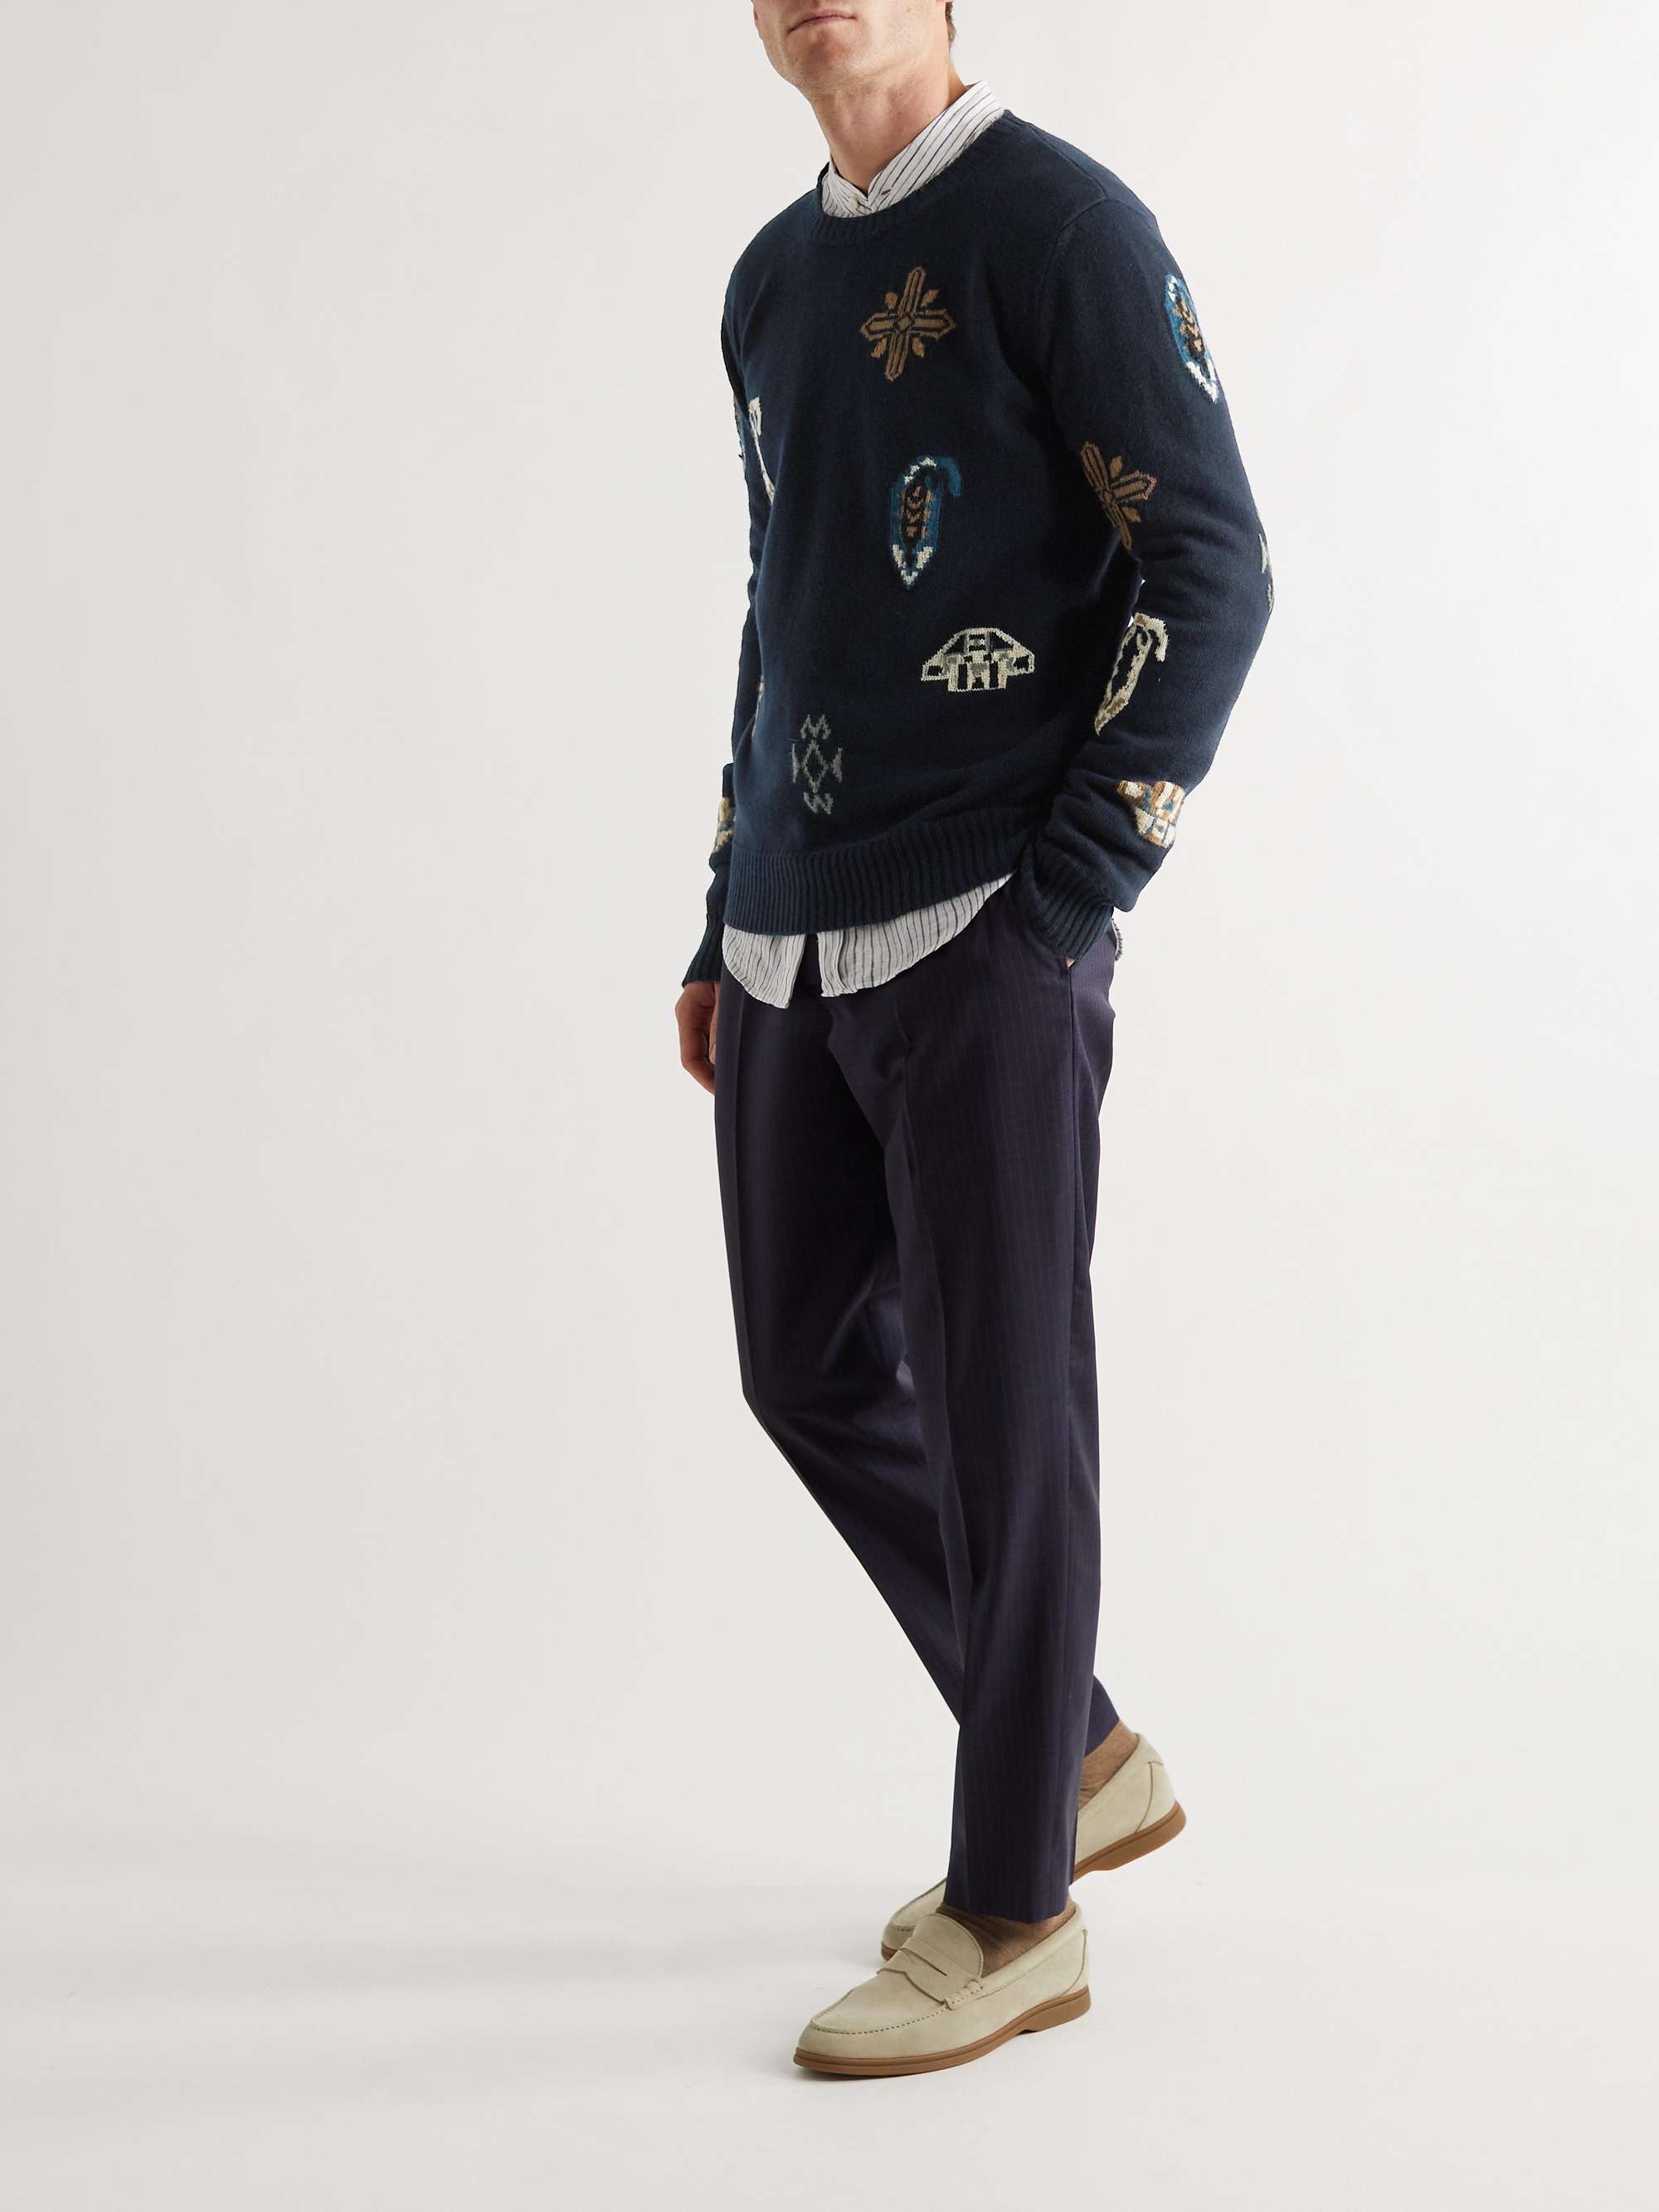 ETRO Intarsia Wool and Cotton-Blend Sweater